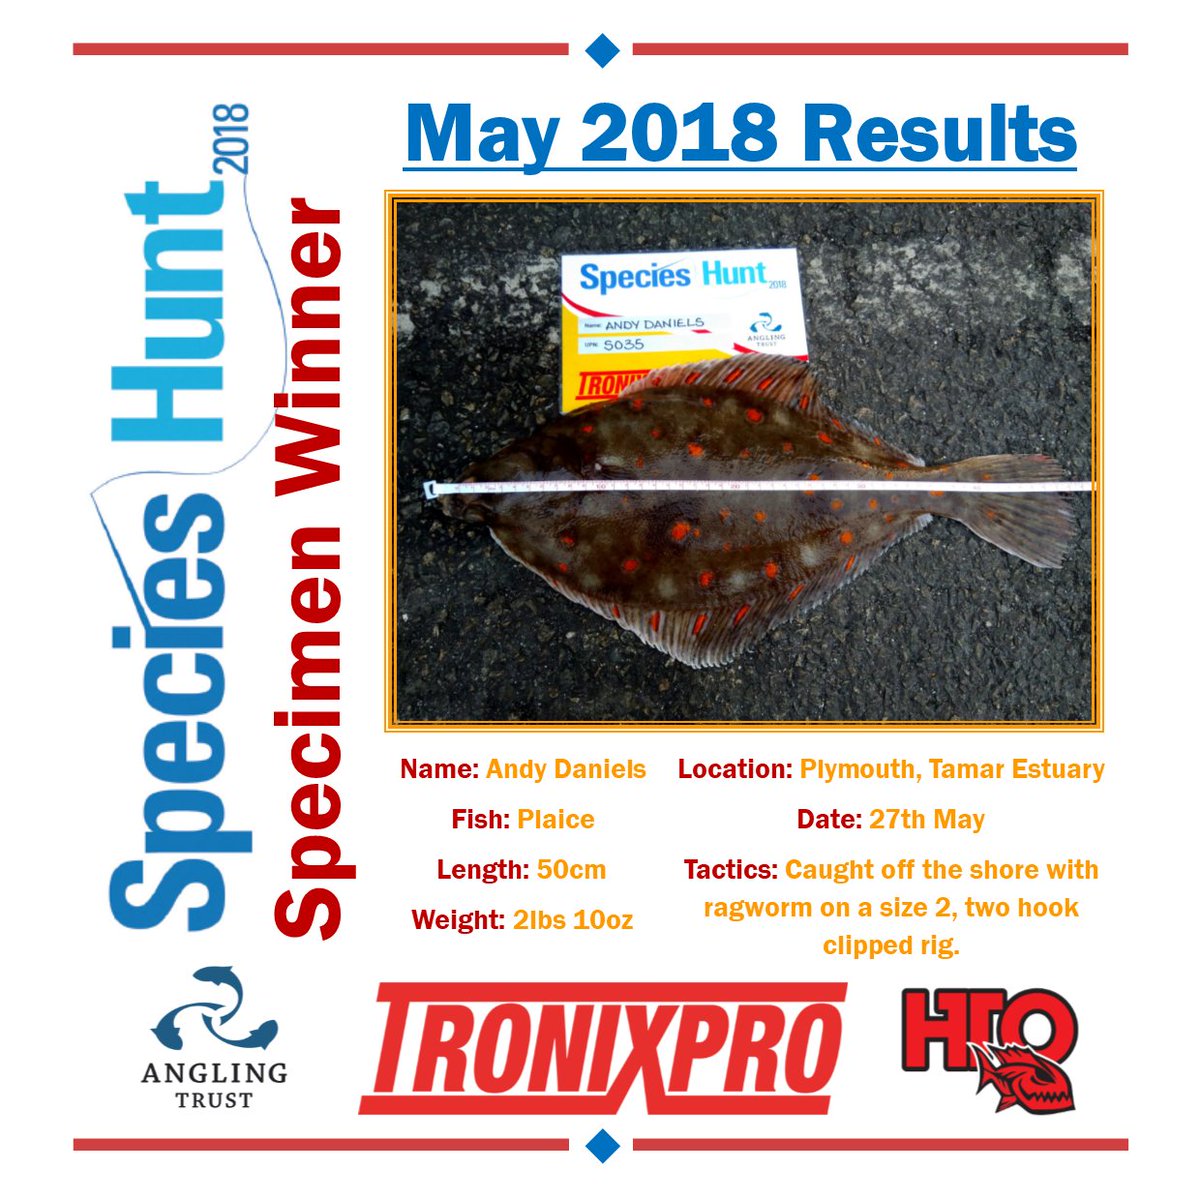 Species Hunt results for May 18

Congratulations Andy Daniels on his Specimen Plaice! Close one this month! 
#anglingtrust #specieshunt #specieshunting #angling #seaangling #shoreangling #tronixpro #hto